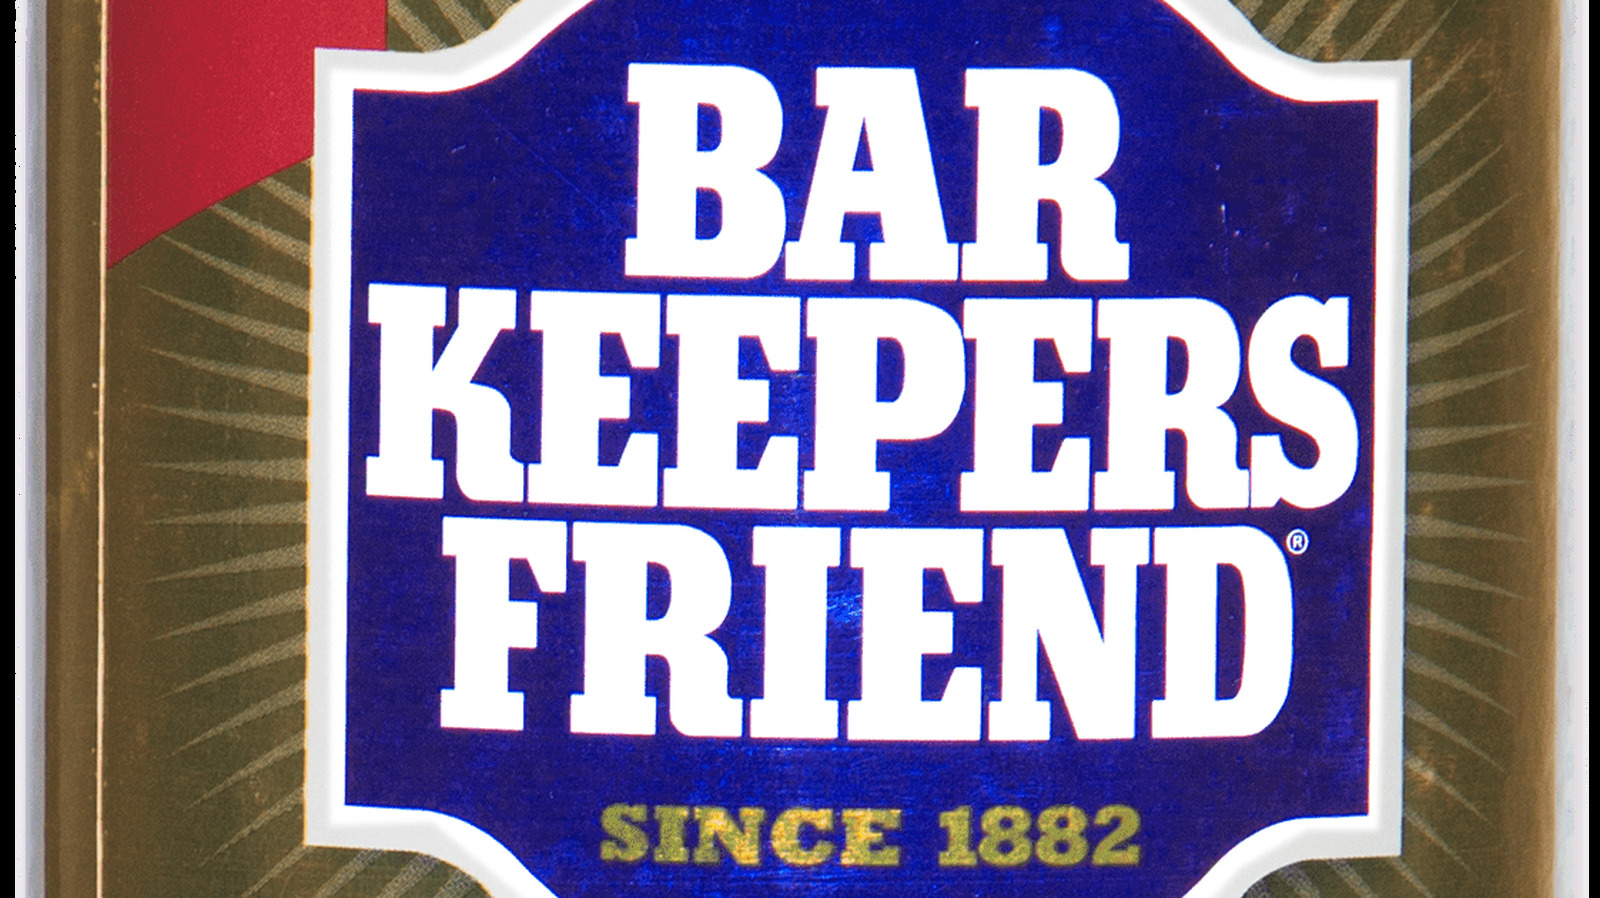 https://www.mashed.com/img/gallery/the-untold-truth-of-bar-keepers-friend/l-intro-1645804663.jpg